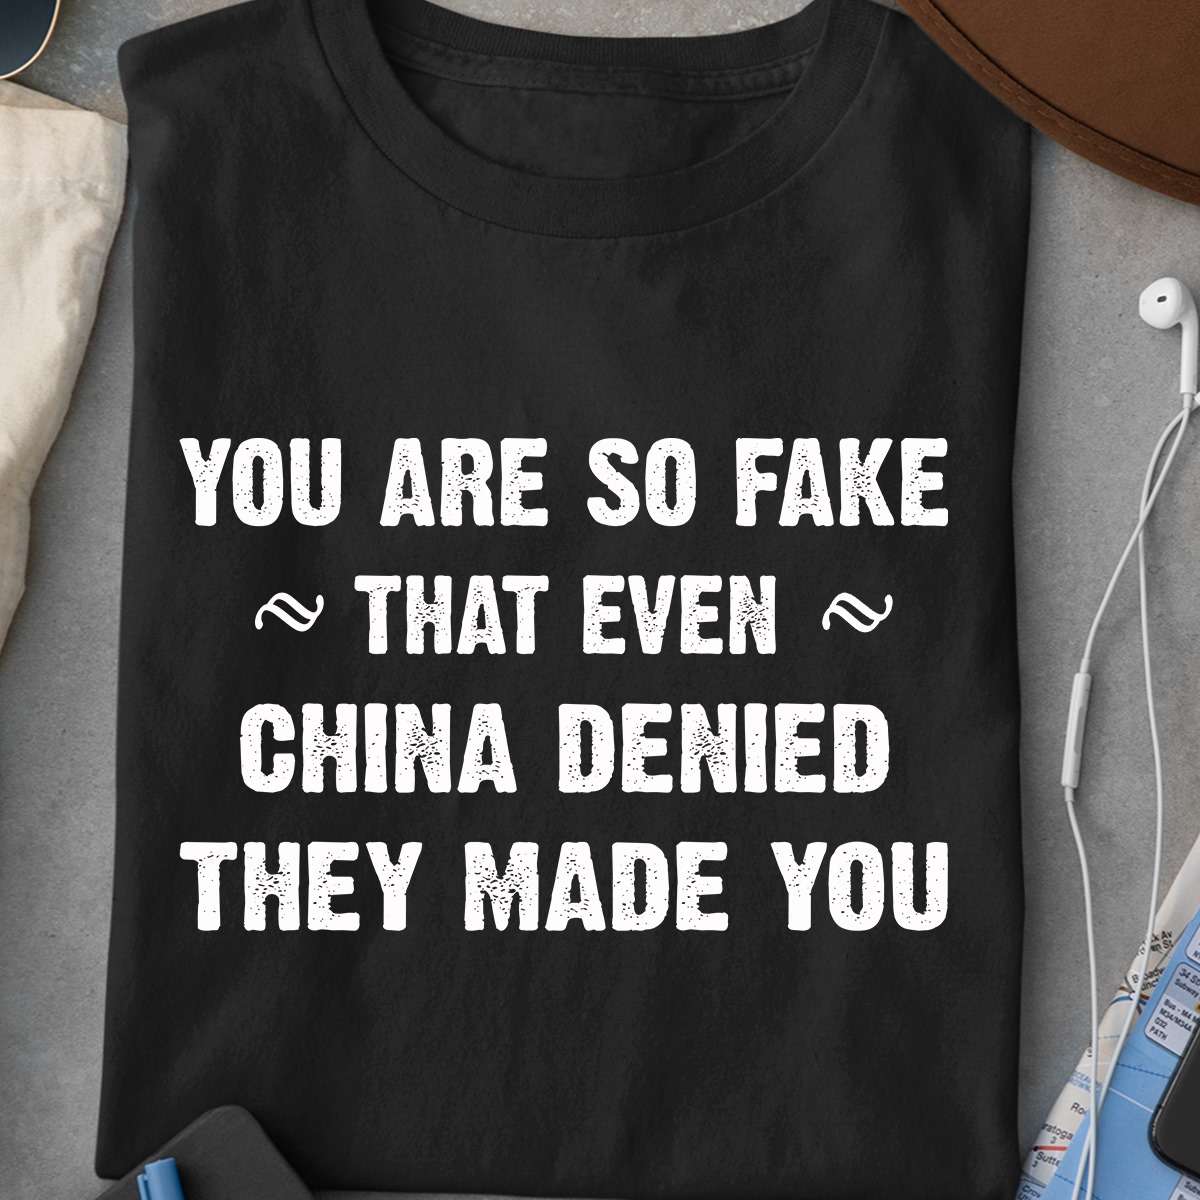 You are so fake that even China denied they made you - Fake person, China denied making you